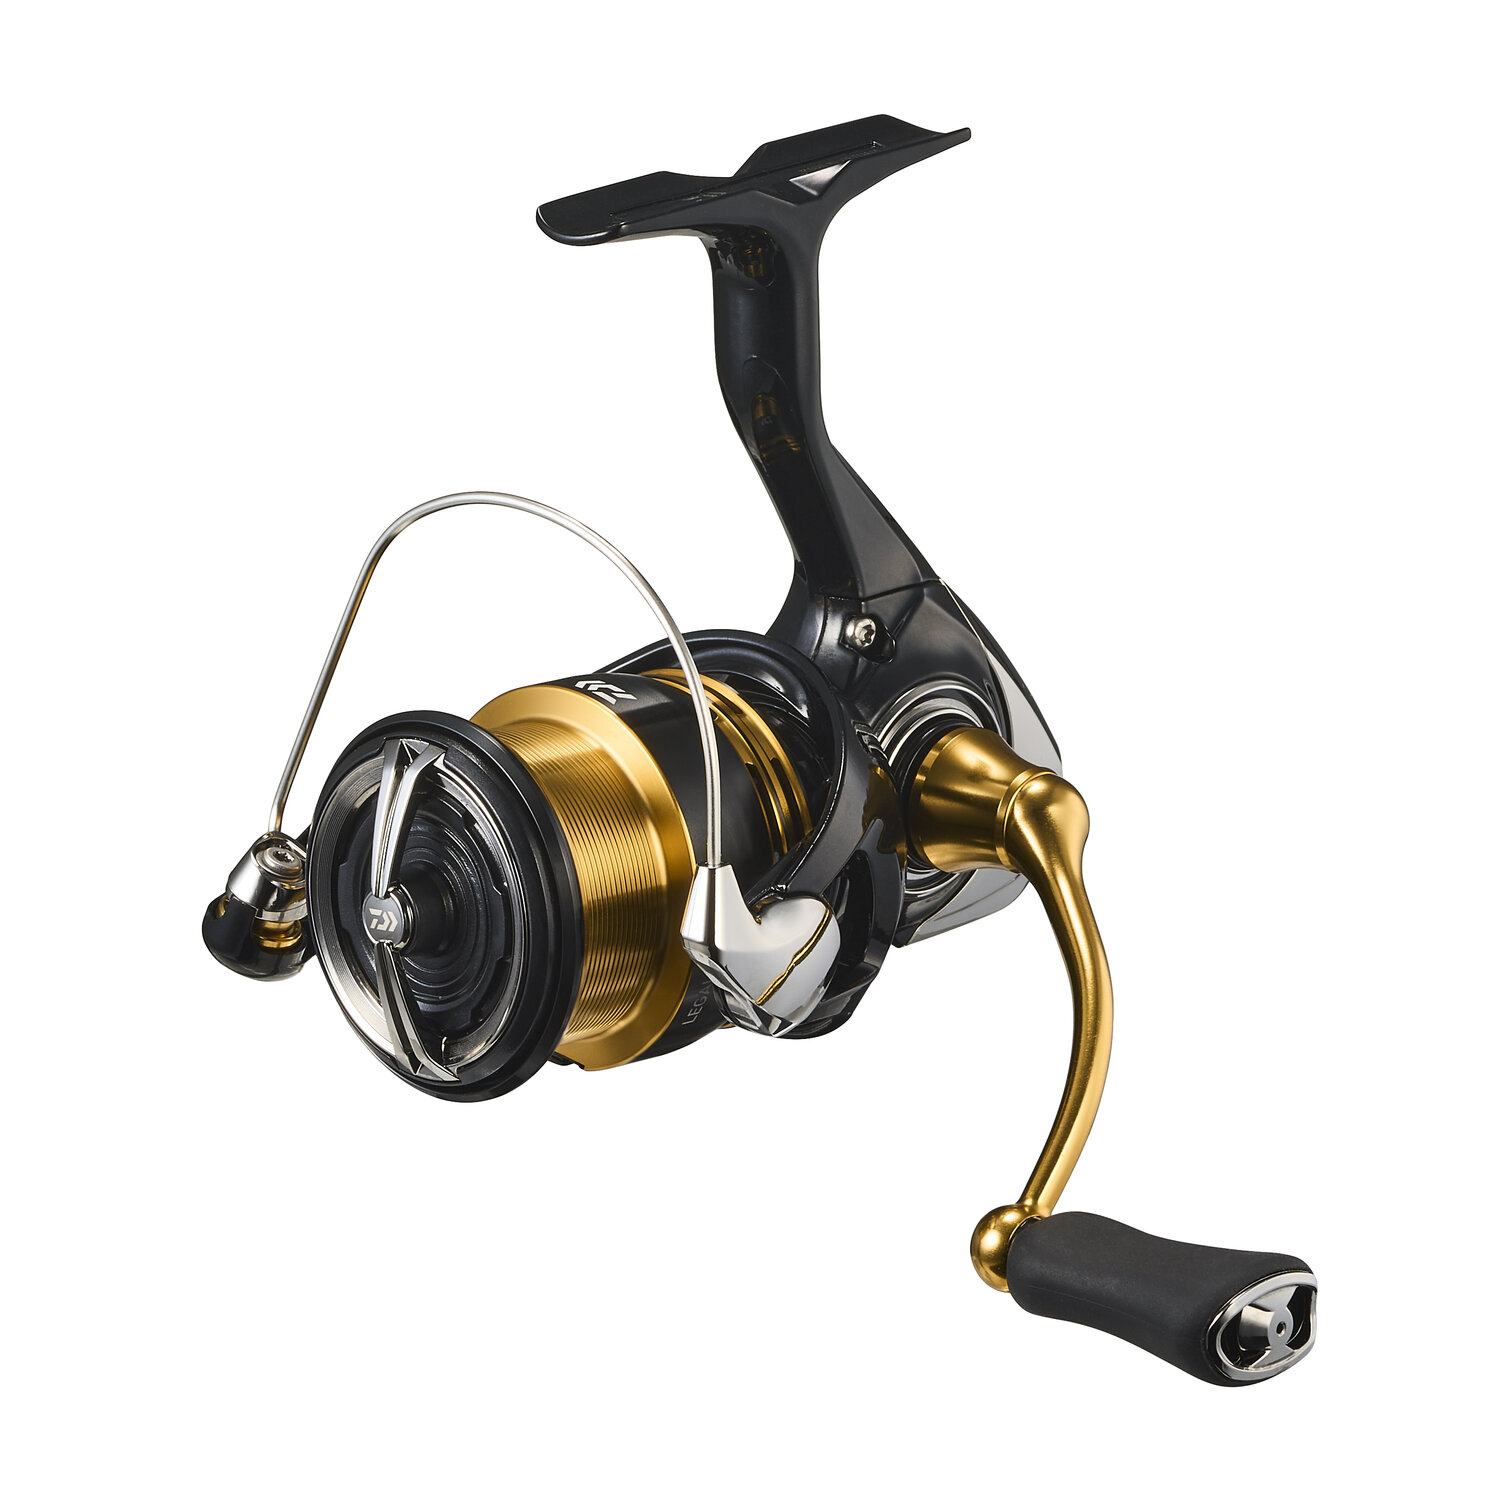 Japan Fishing Tackle News - purchase Japanese products online